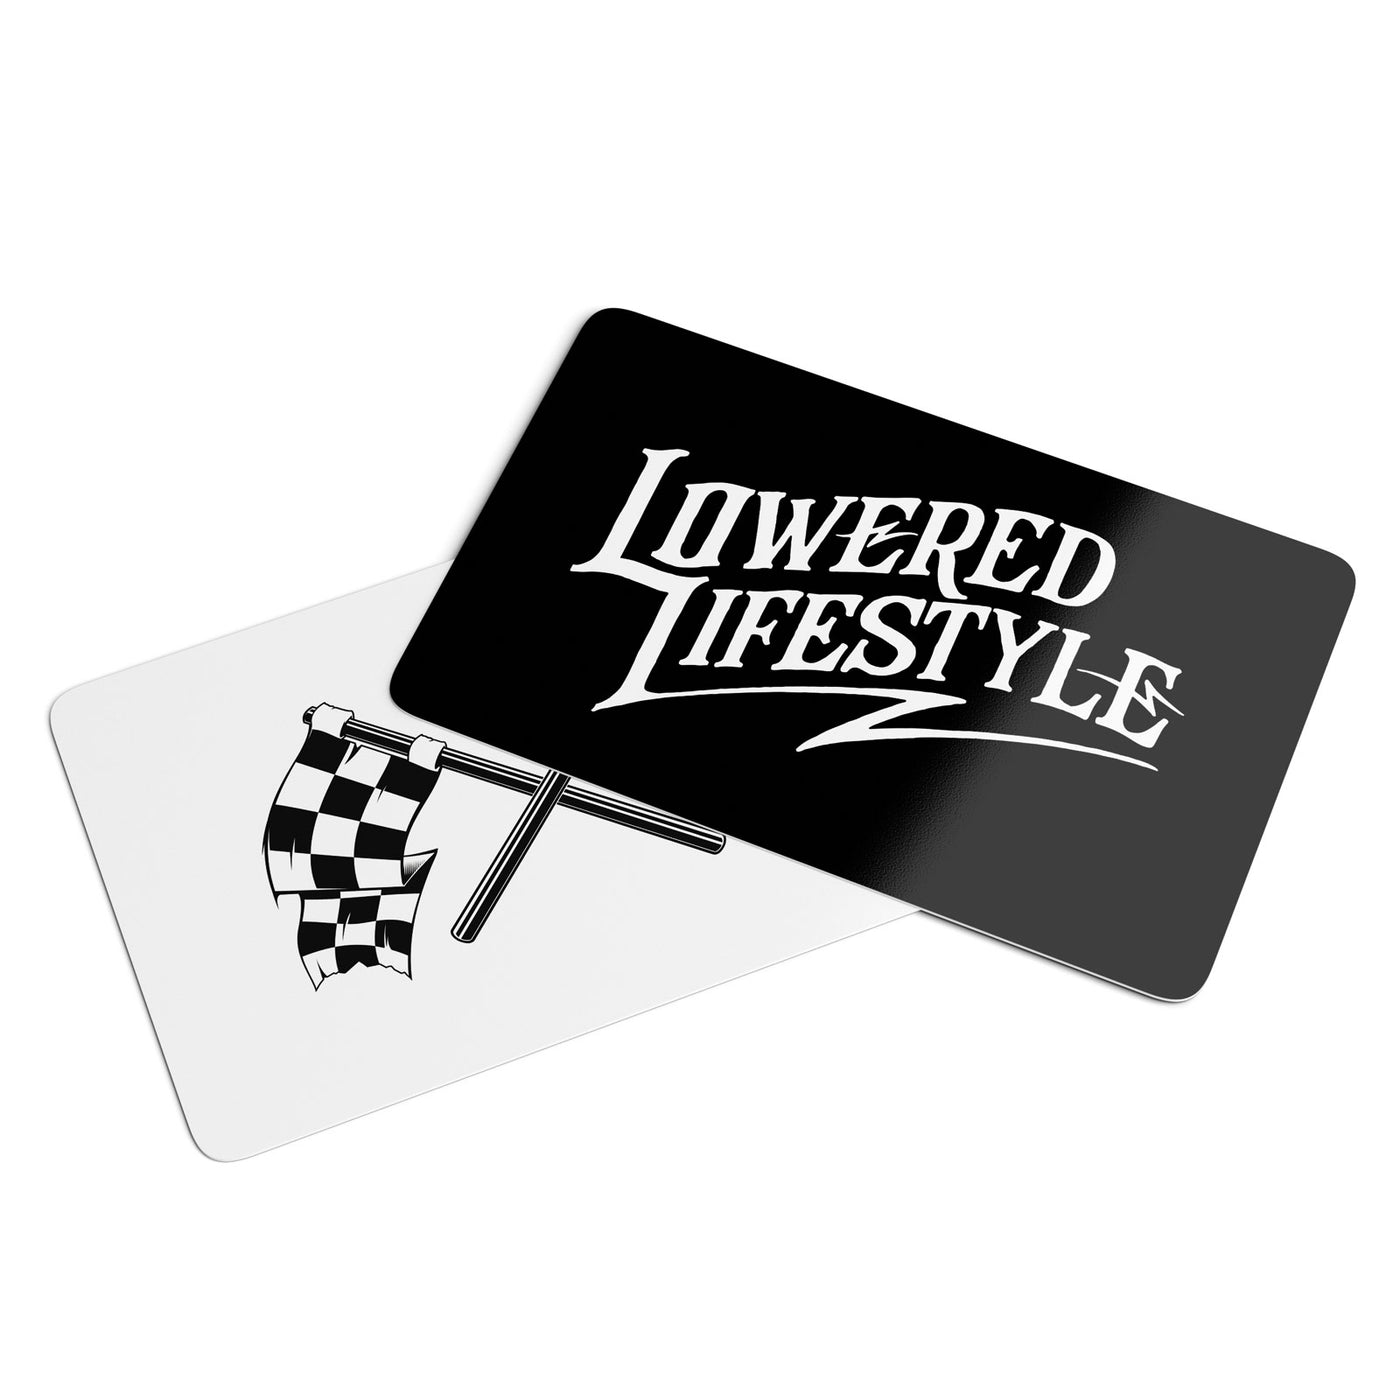 Lowered Lifestyle Gift Card